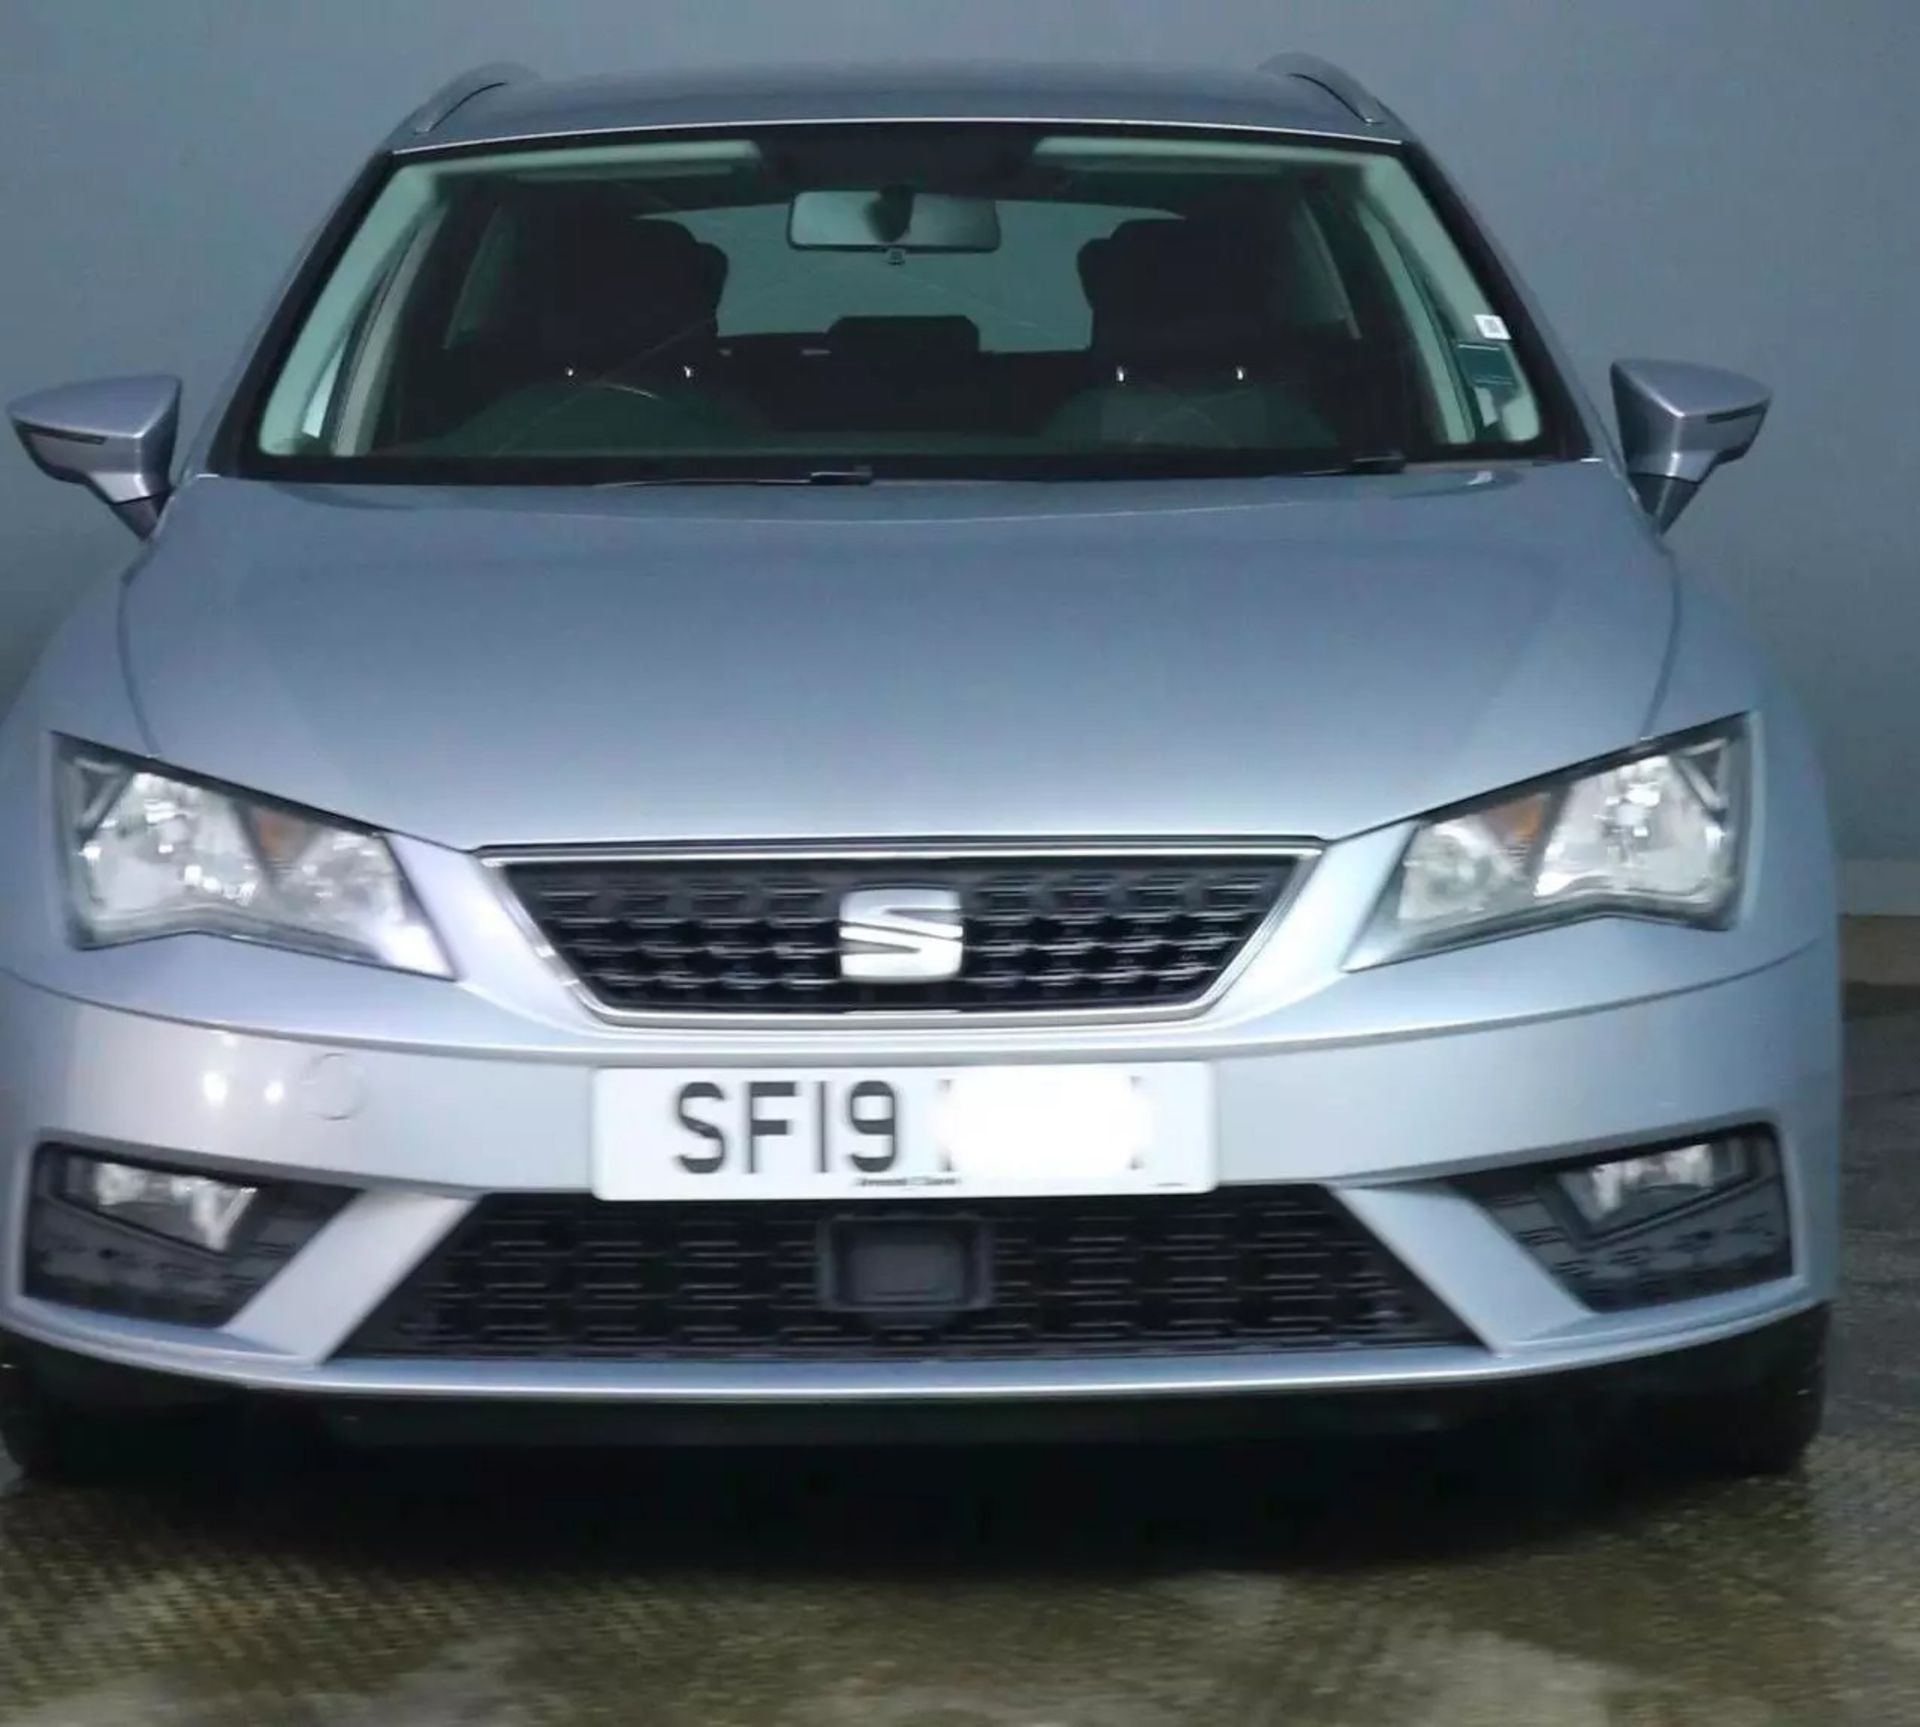 >>--NO VAT ON HAMMER--<< EFFICIENT 2019 SEAT LEON 1.6 TDI SE ESTATE - RELIABLE AND SPACIOUS! - Image 2 of 12